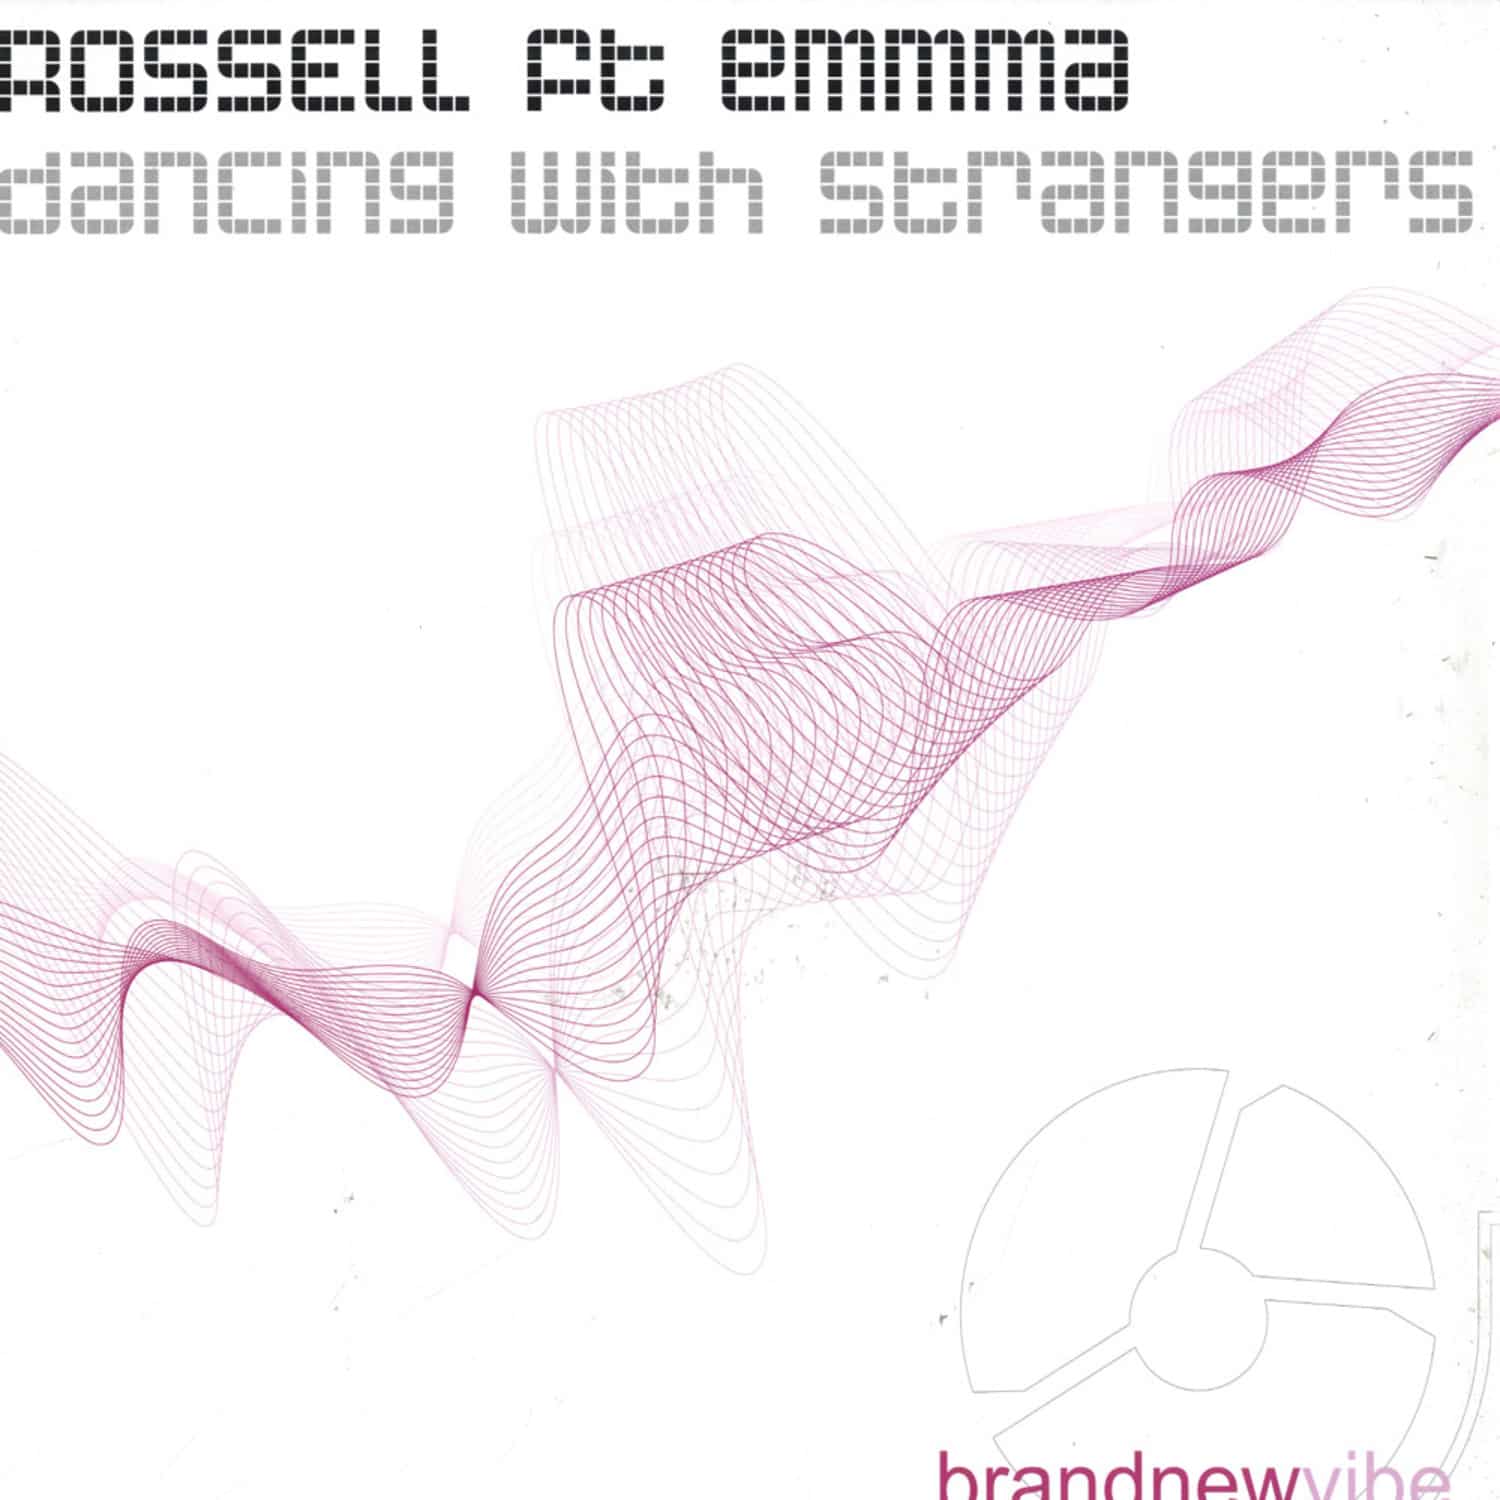 Rossell - DANCING WITH STRANGERS